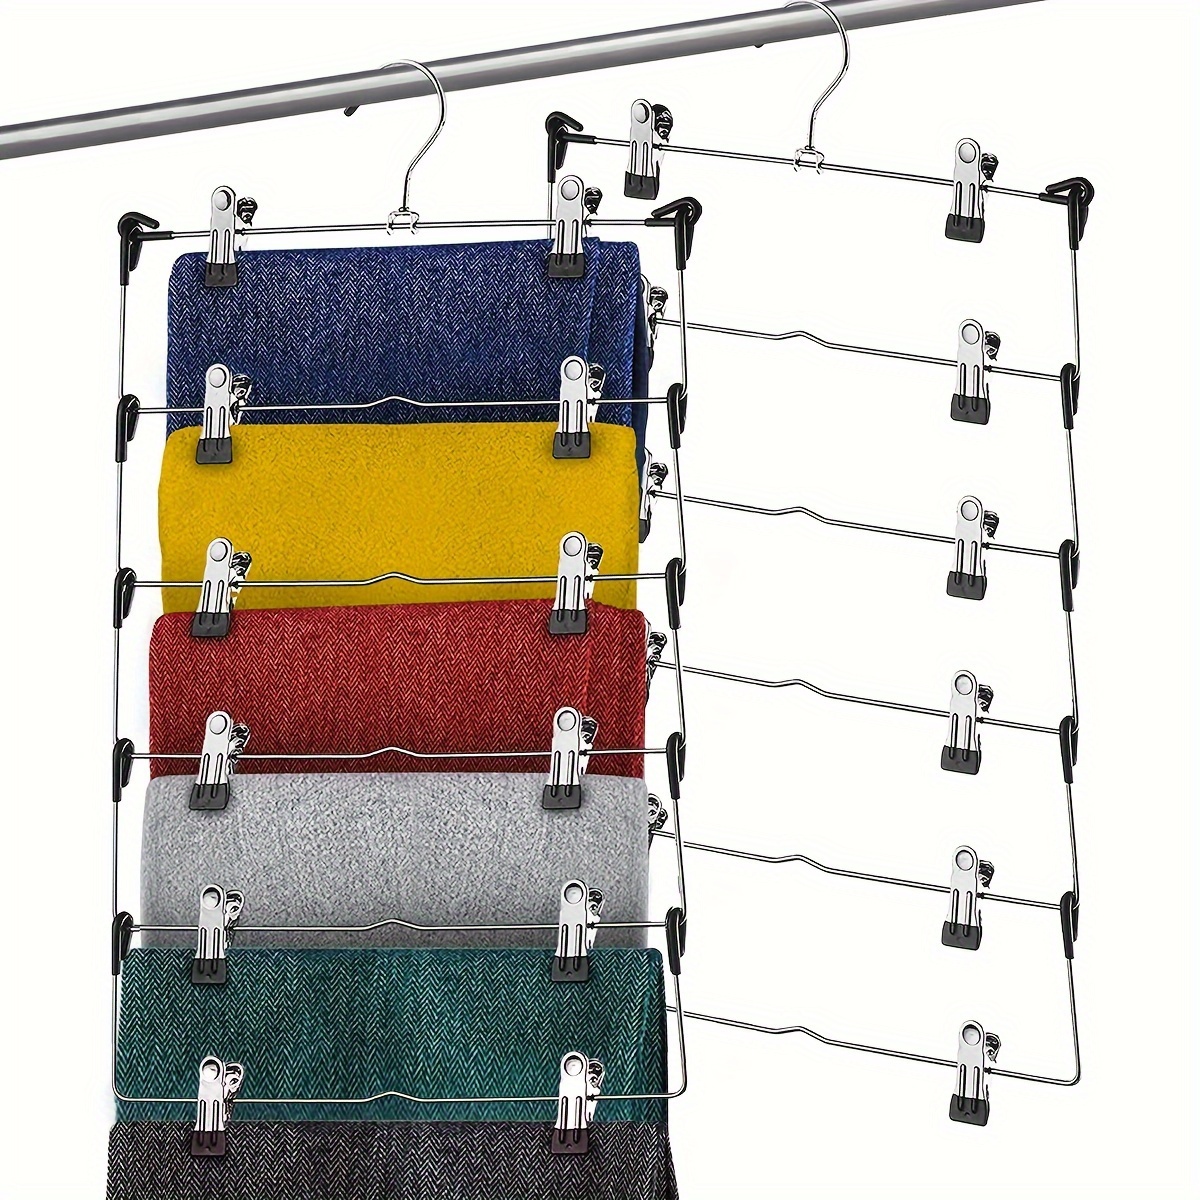 

1pc Pants Drying Hanger With Multi-layer, Clothes Storage Rack For Skirts, Bras, Scarves, Underwear, Clothes Organizer For Closet, Wardrobe, Bedroom, Balcony, Dorm, Back To College Essential